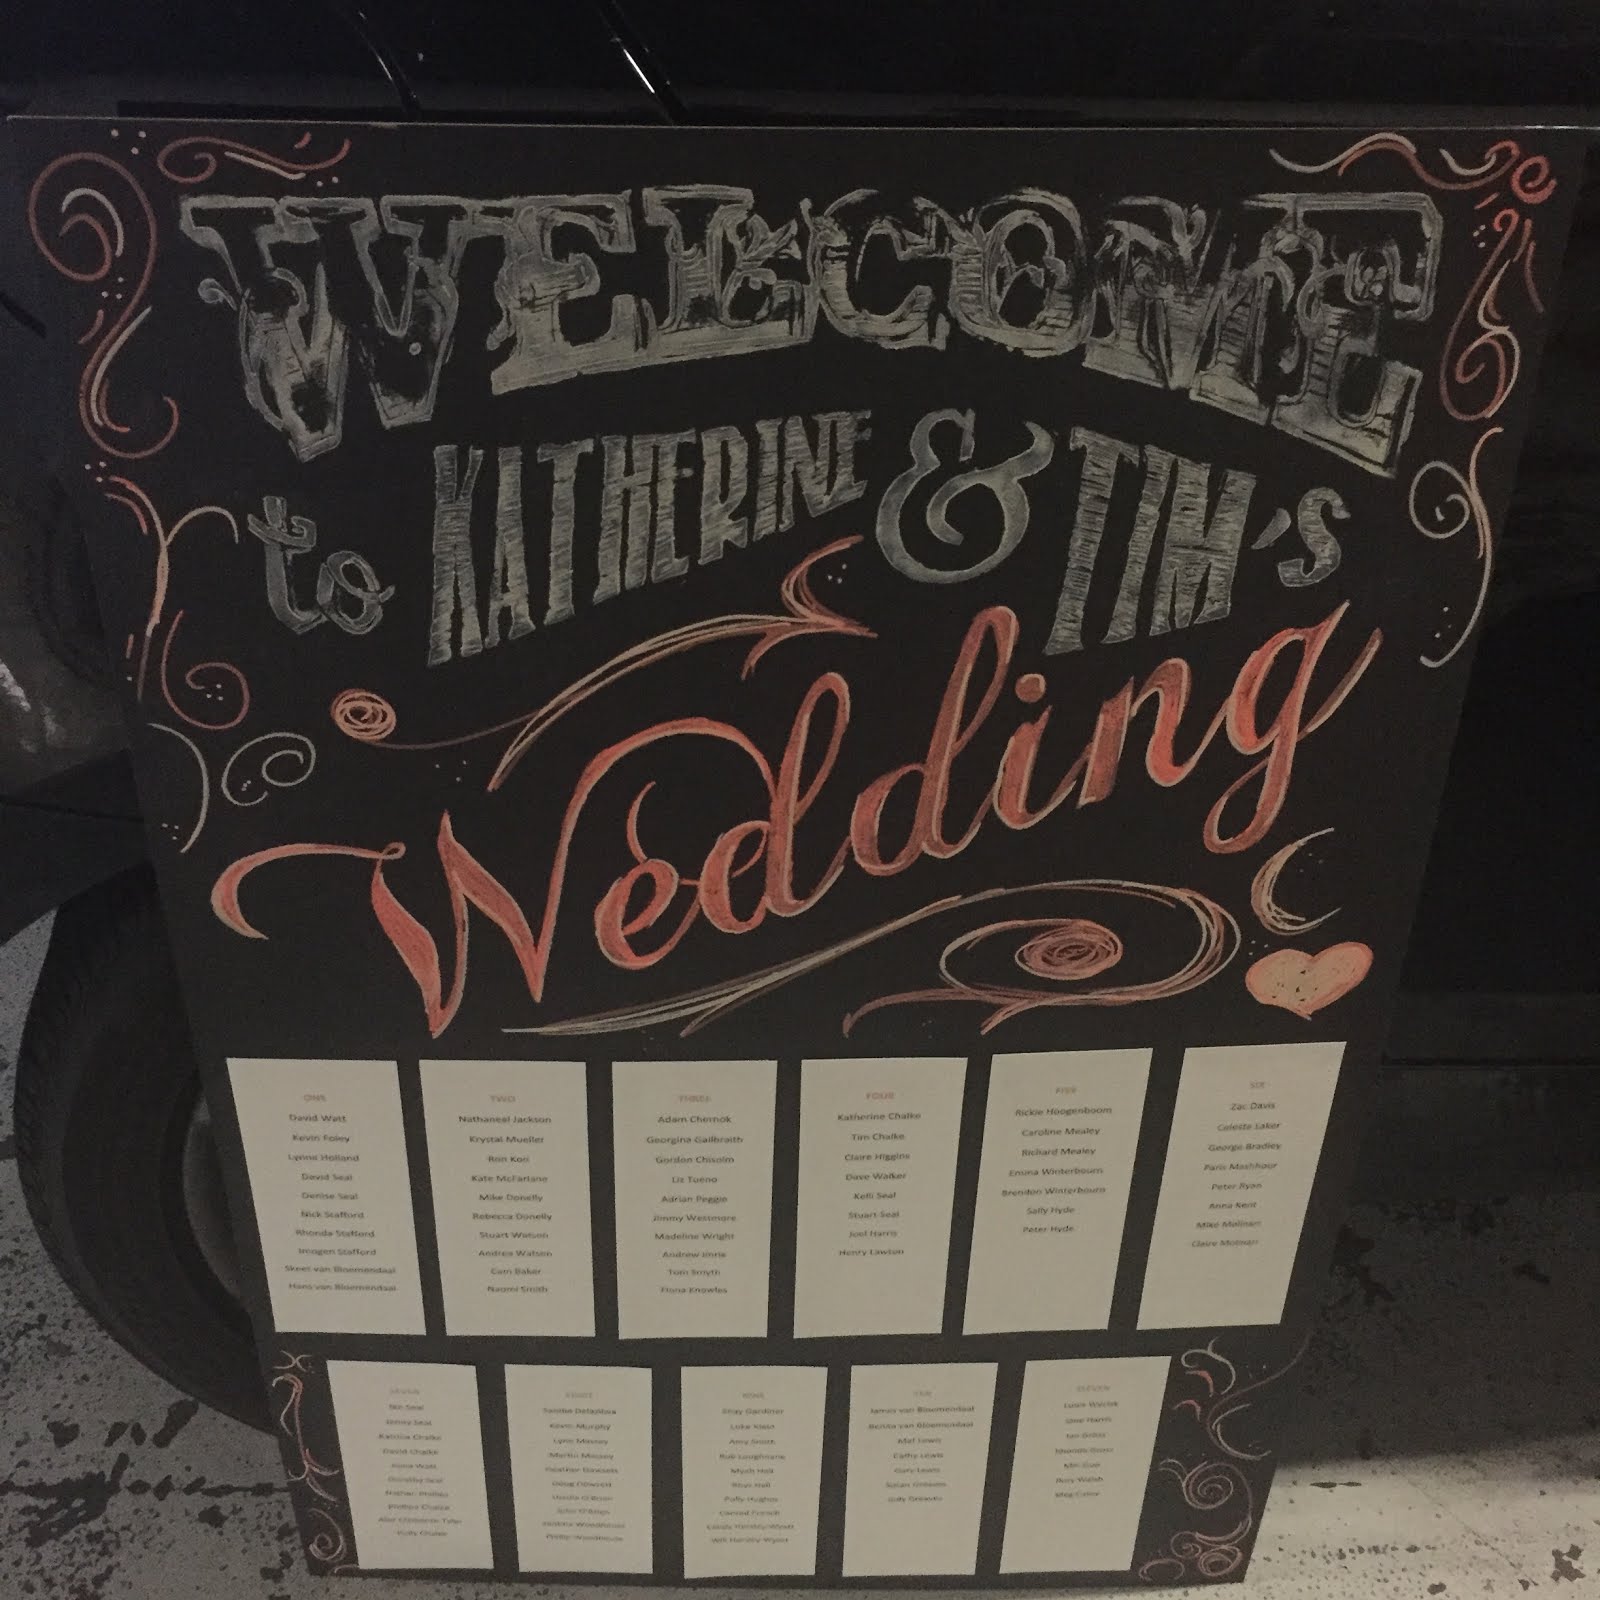 Another of my Chalkboard signs